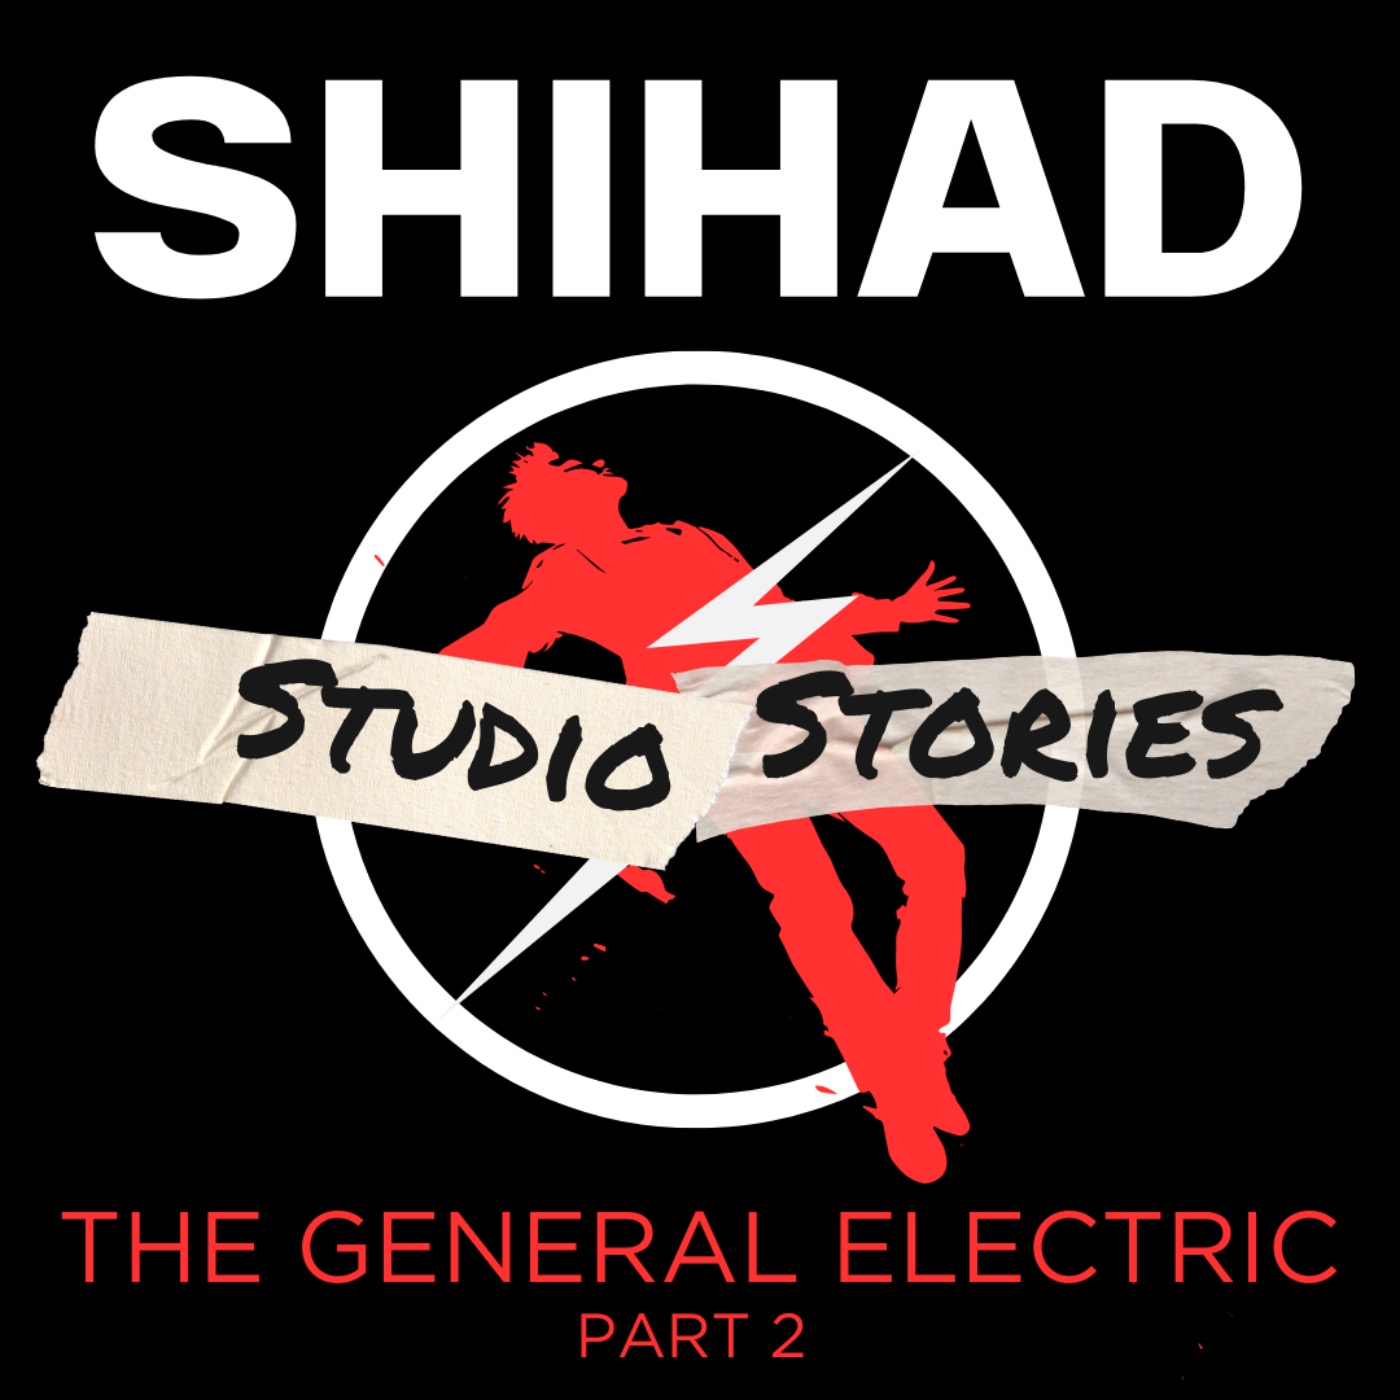 Shihad - The General Electric Part 2 w/Karl Kippenberger and Gggarth Richardson